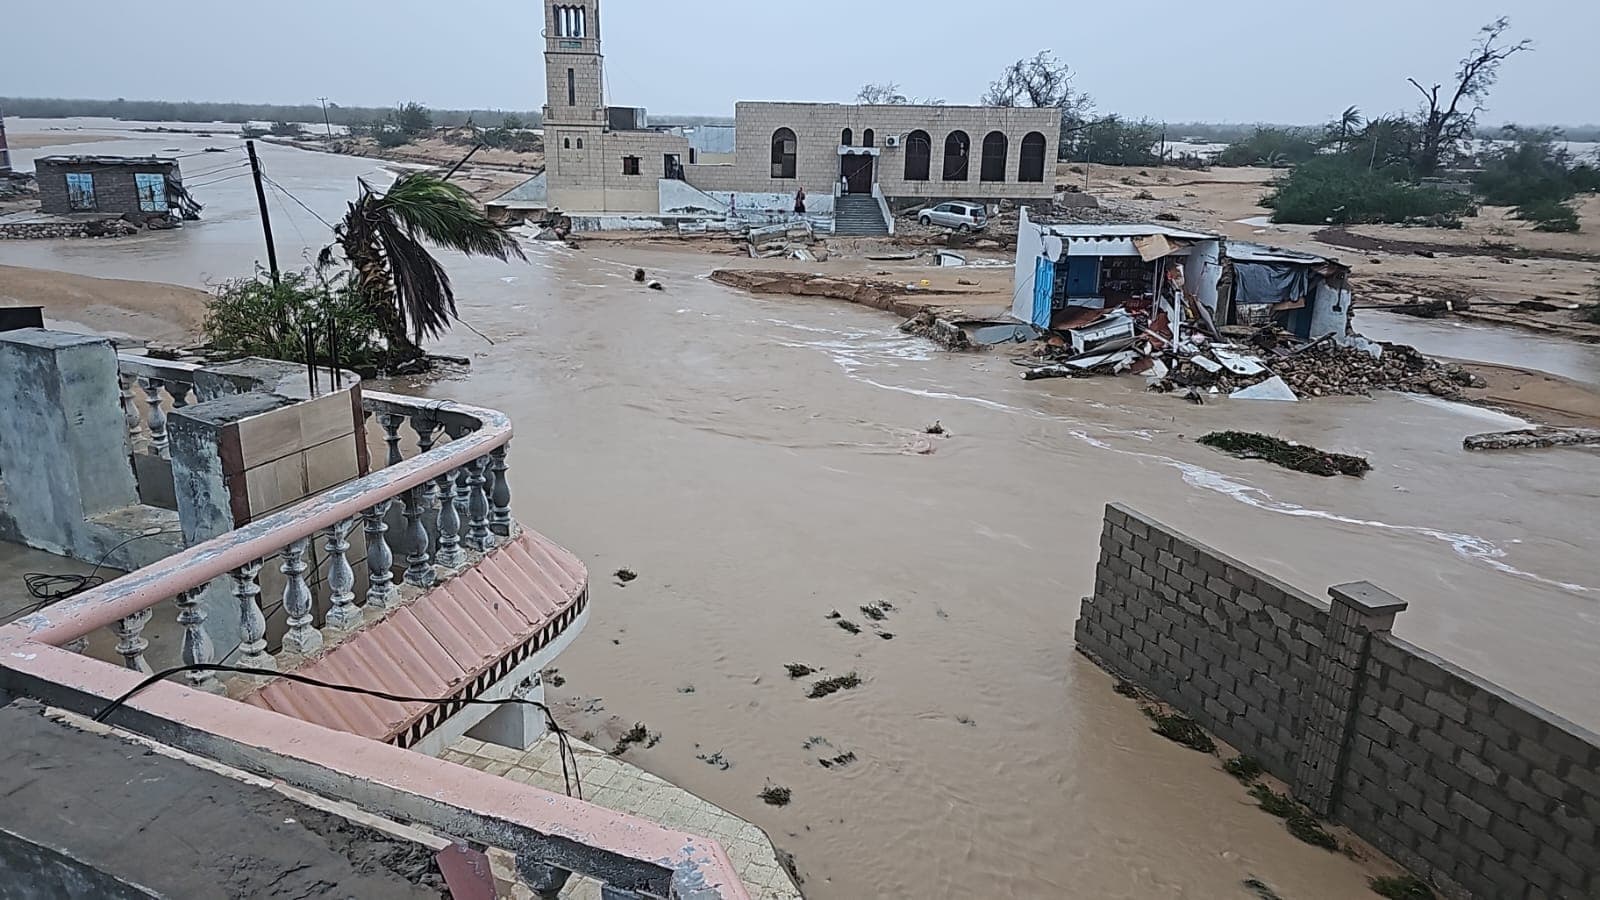 Floods cause 40 deaths and injuries in Al-Mahra, South Yemen